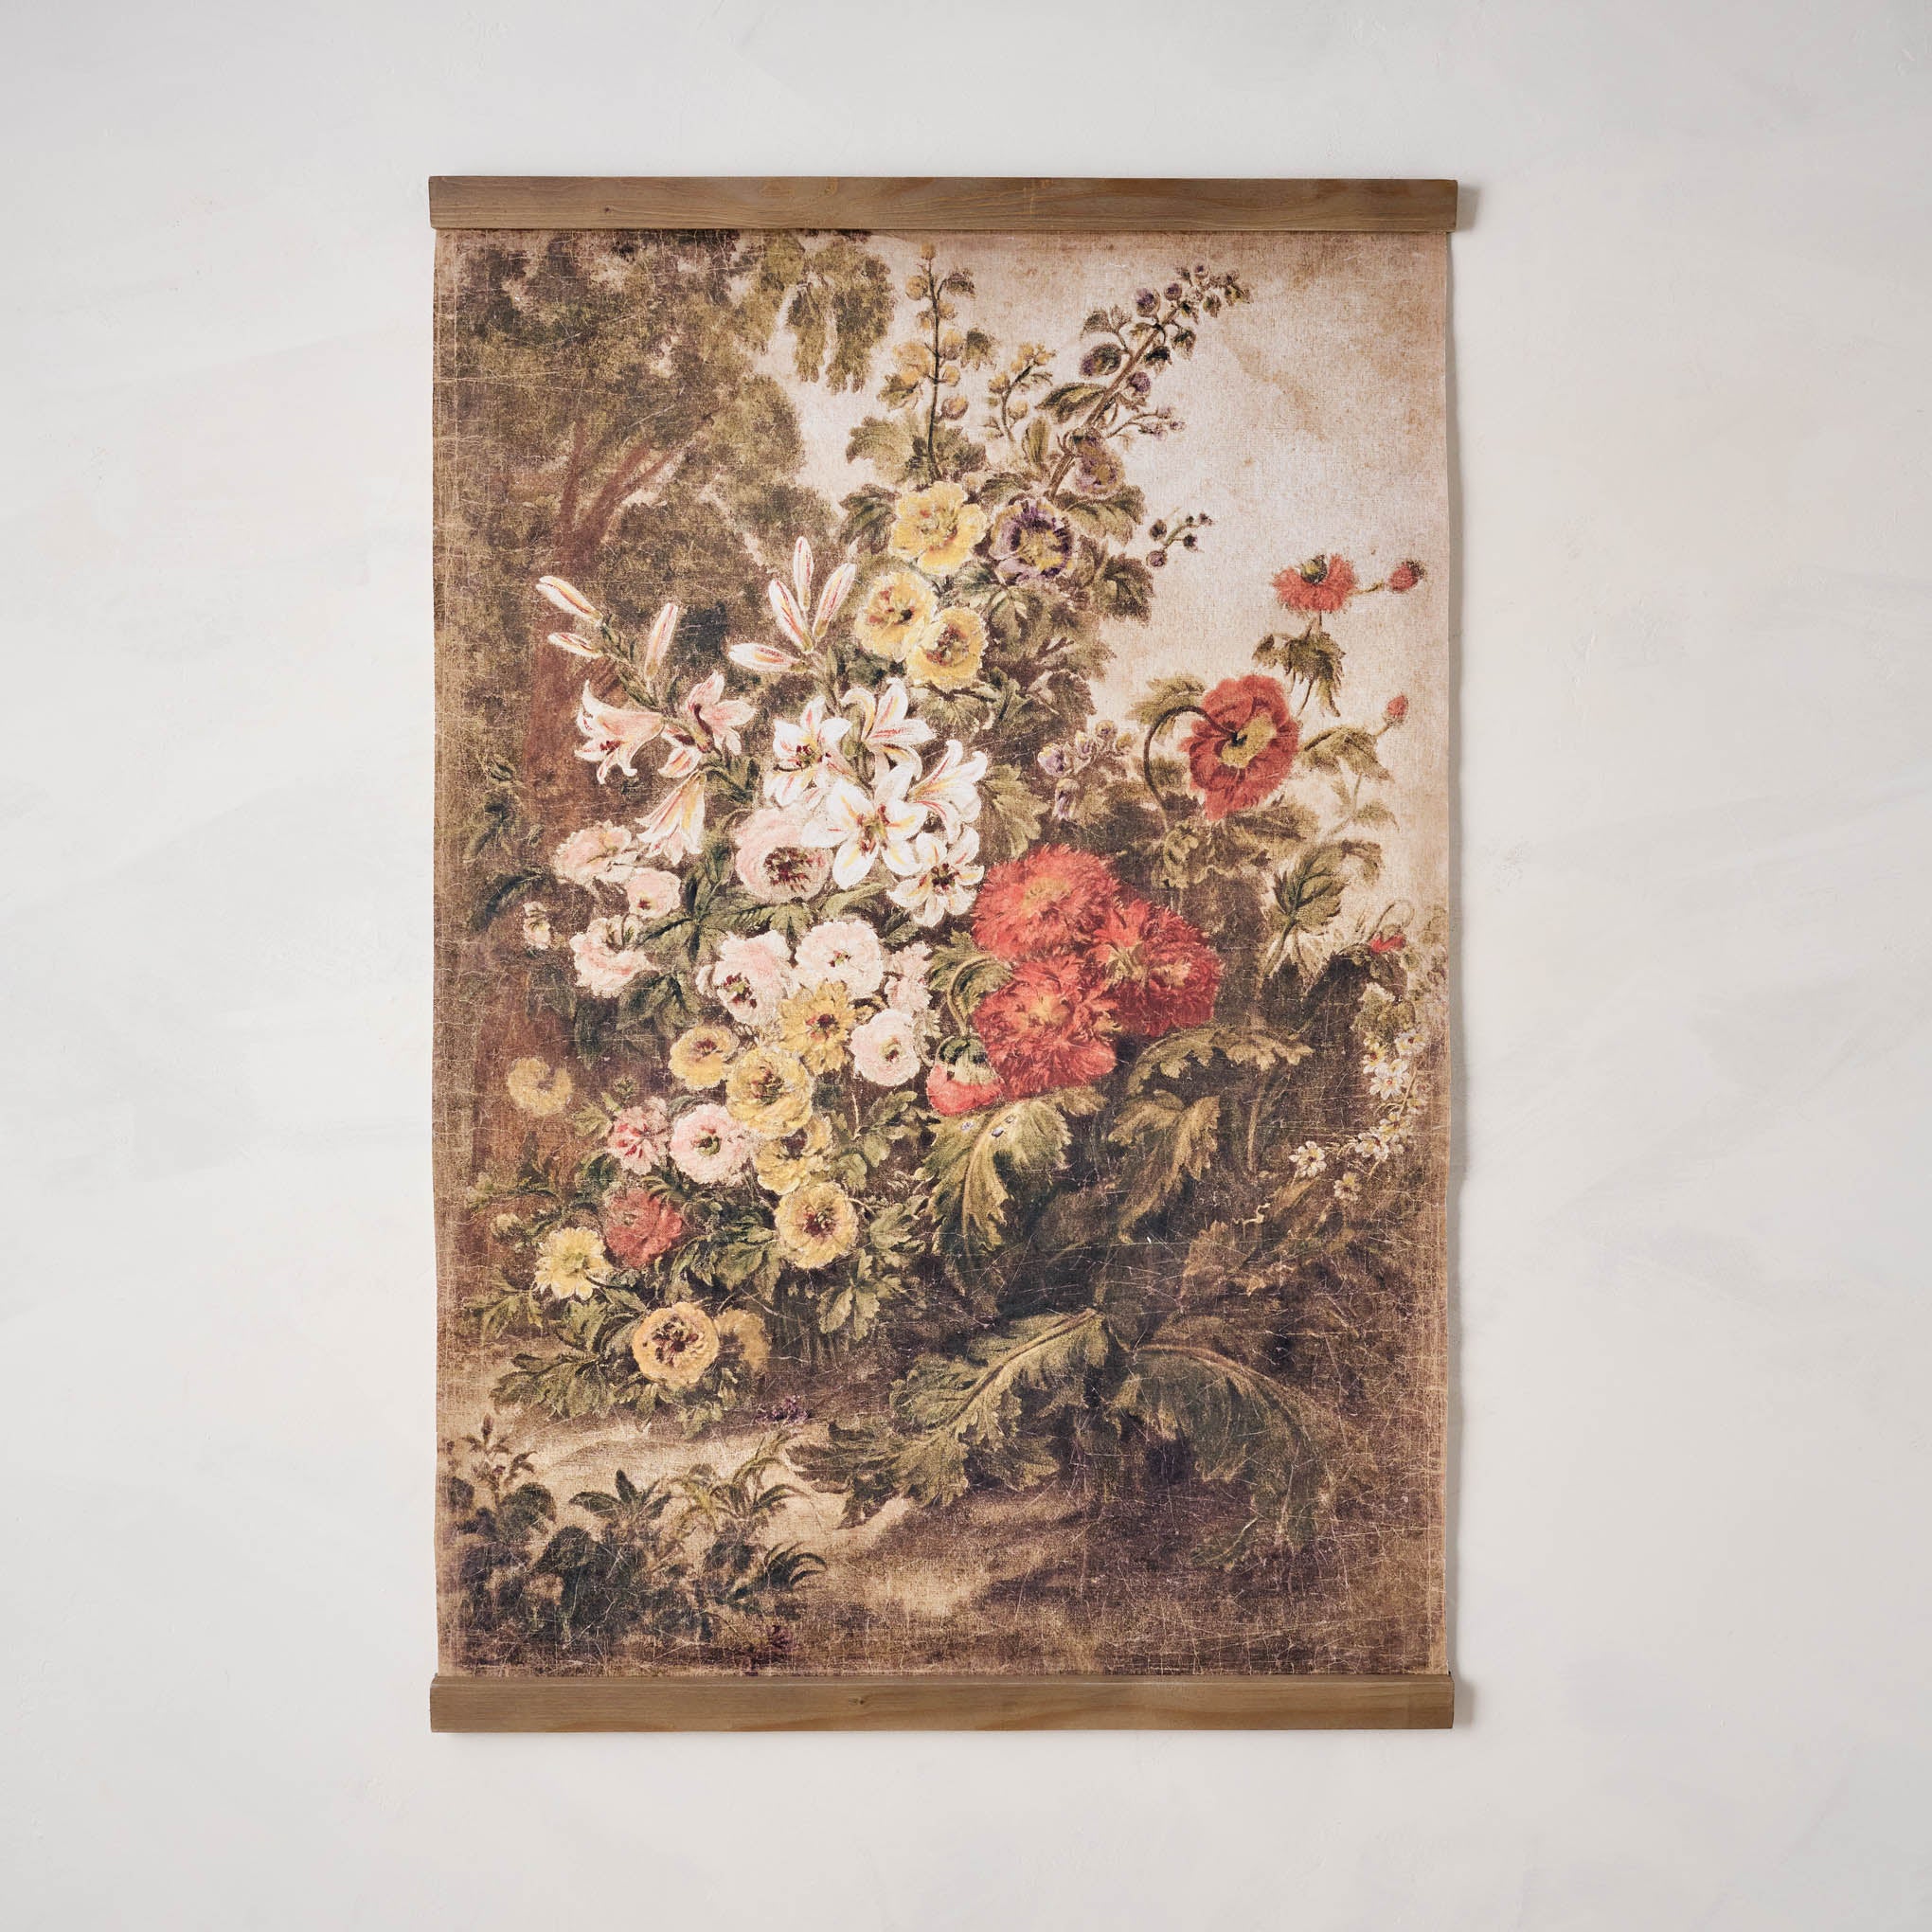 Wall art tapestry called Secret Garden Floral Tapestry $88.00